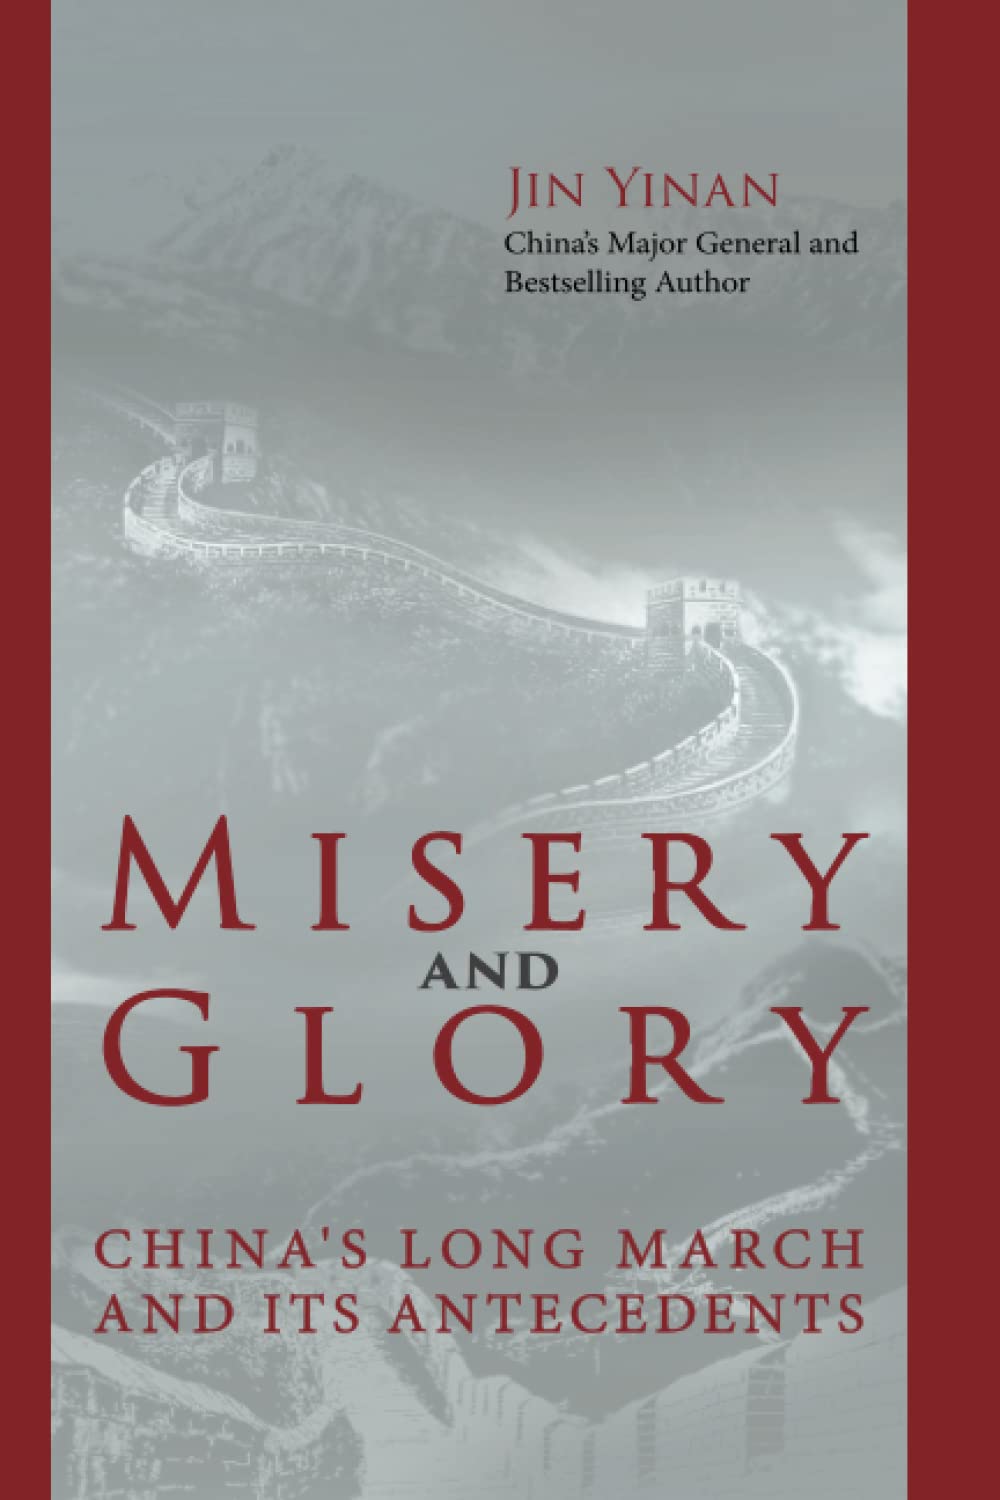 Misery and Glory: China's Long March and Its Antecedents